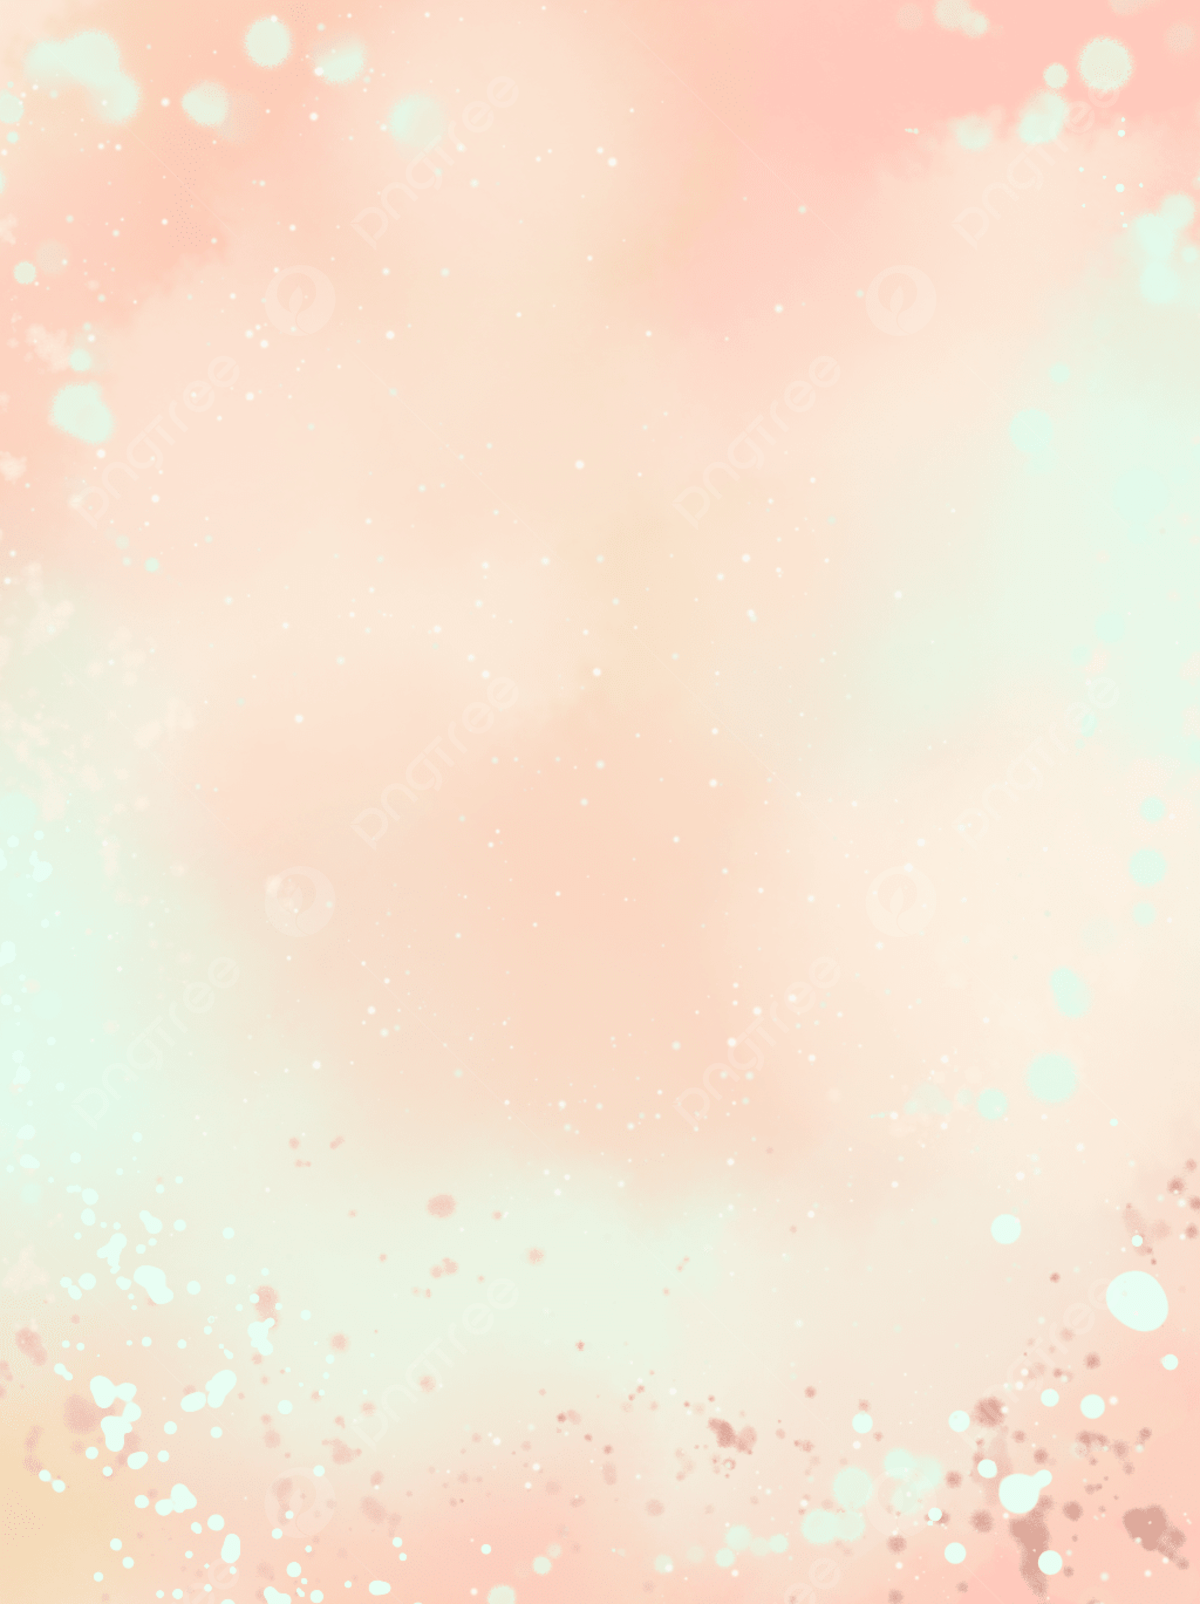 A pink and blue gradient background with white dots - Warm